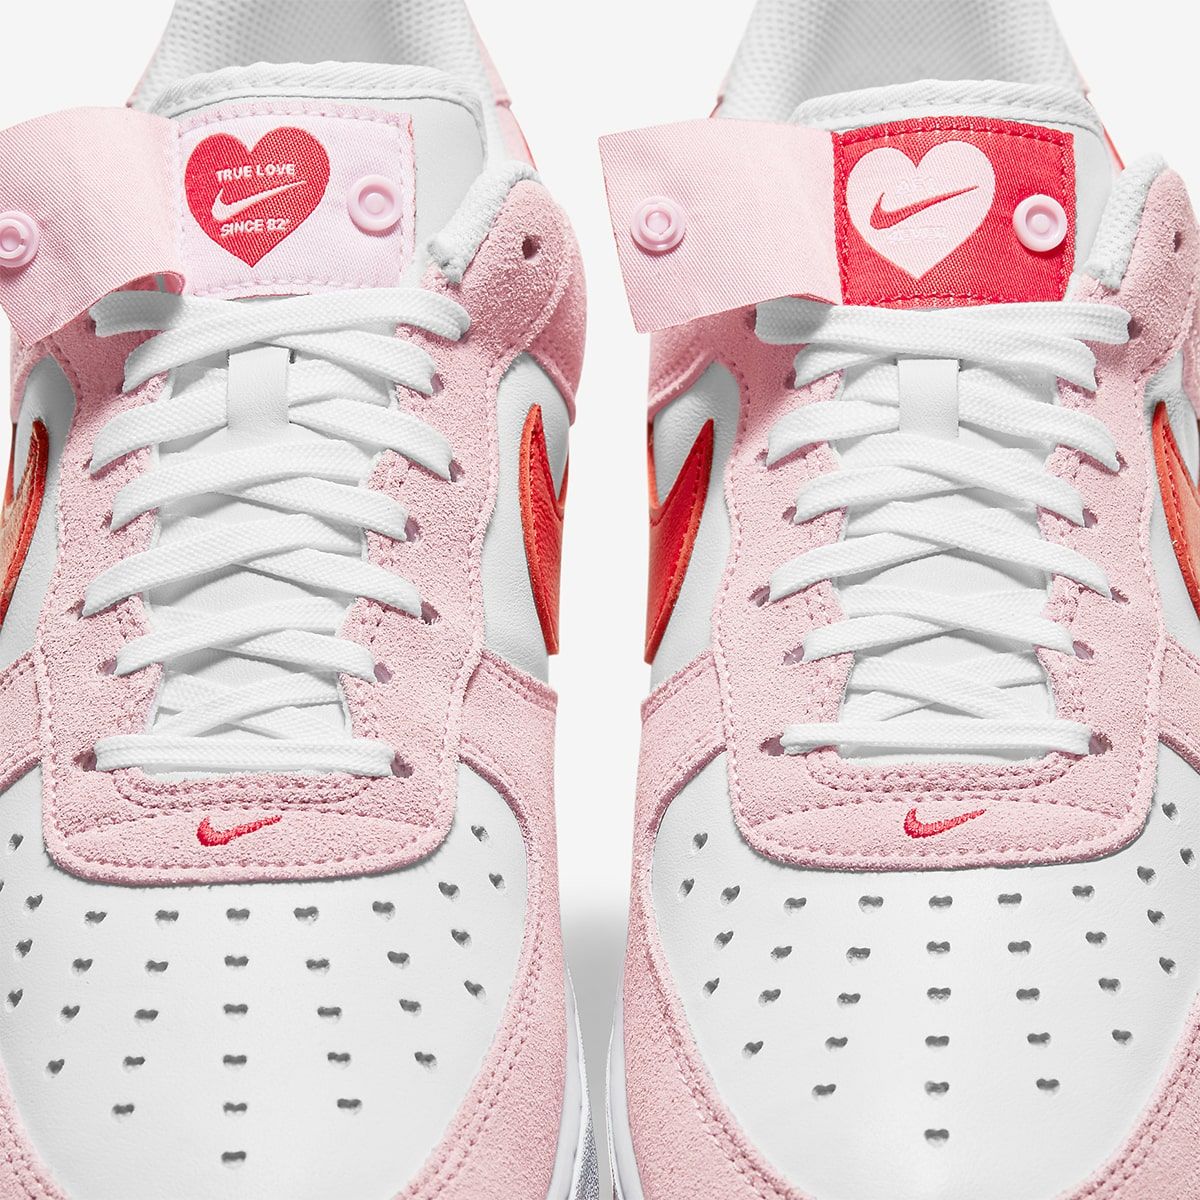 Where to Buy the Nike Air Force 1 Low "Love Letter" HOUSE OF HEAT